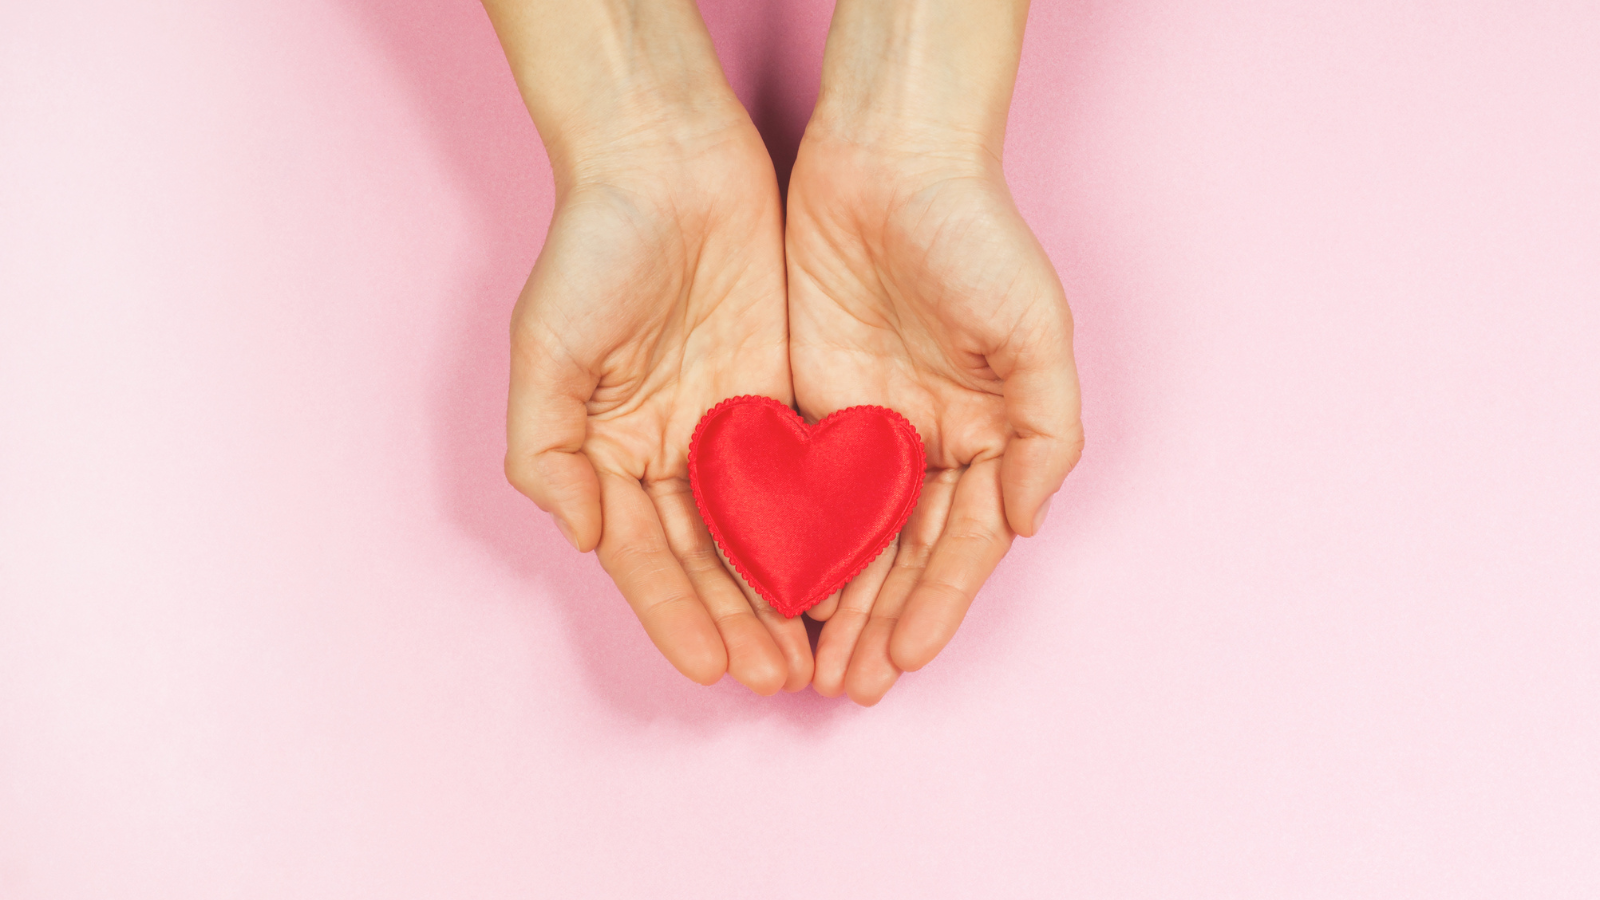 It’s National Heart Month – time to show your heart some love!